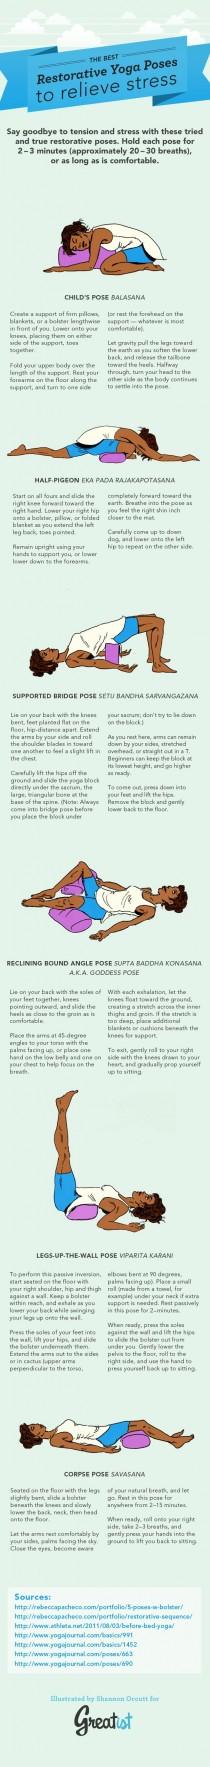 wedding photo - The Best Restorative Yoga Poses To Relieve Stress [INFOGRAPHIC]